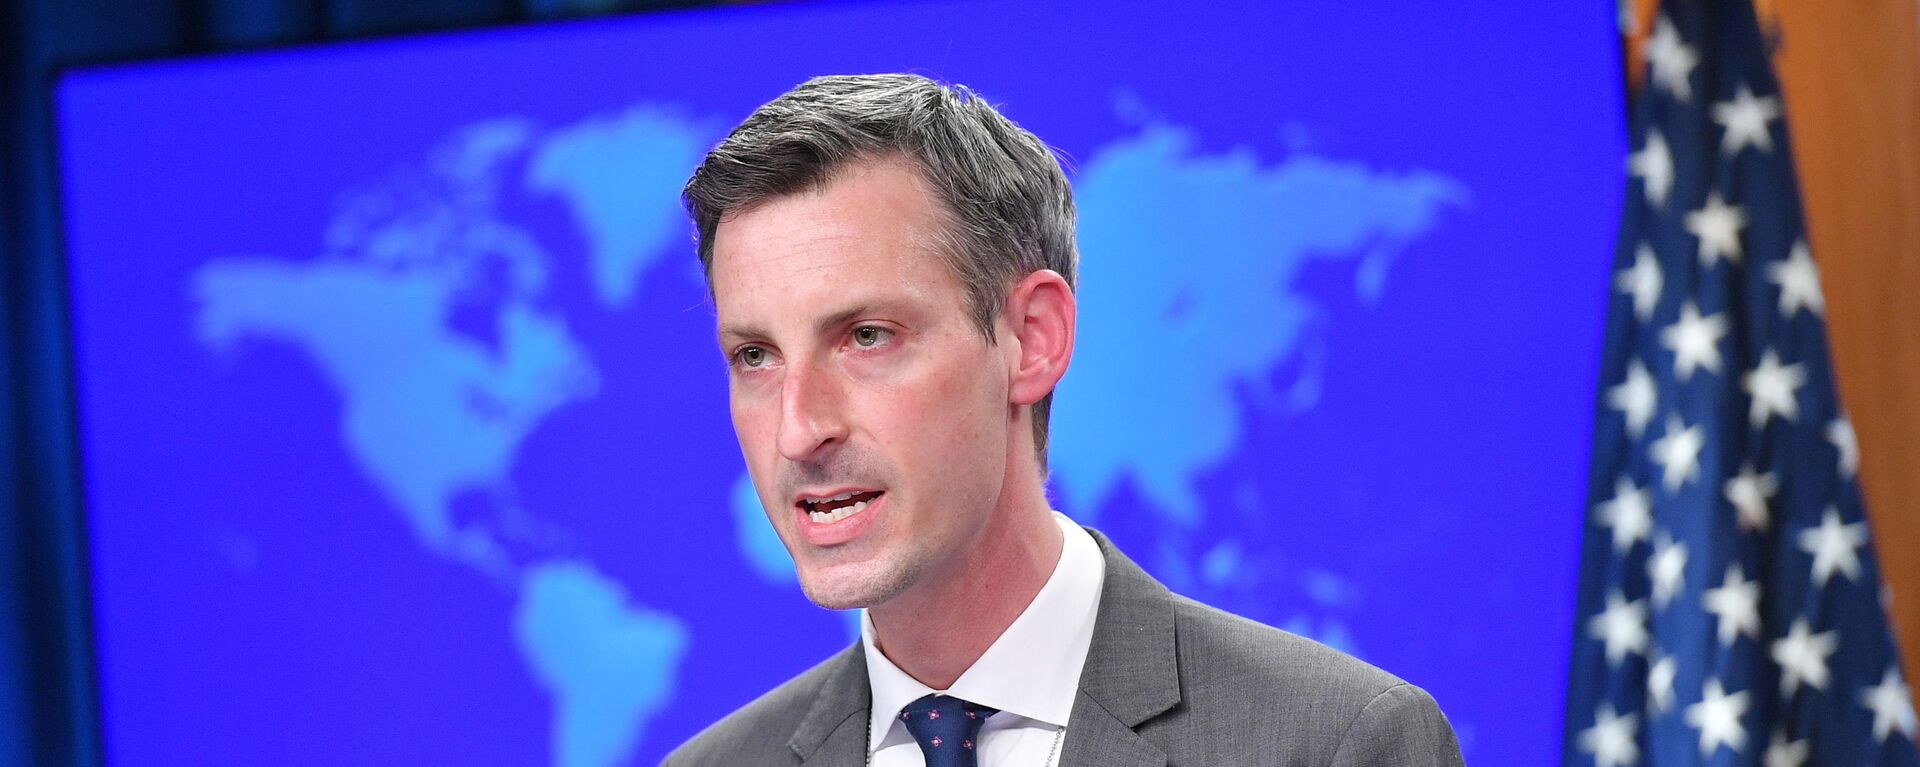 U.S. State Department spokesman Ned Price speaks during the release of the 2020 Country Reports on Human Rights Practices at the State Department in Washington, DC, U.S., March 30, 2021. - Sputnik International, 1920, 09.09.2021